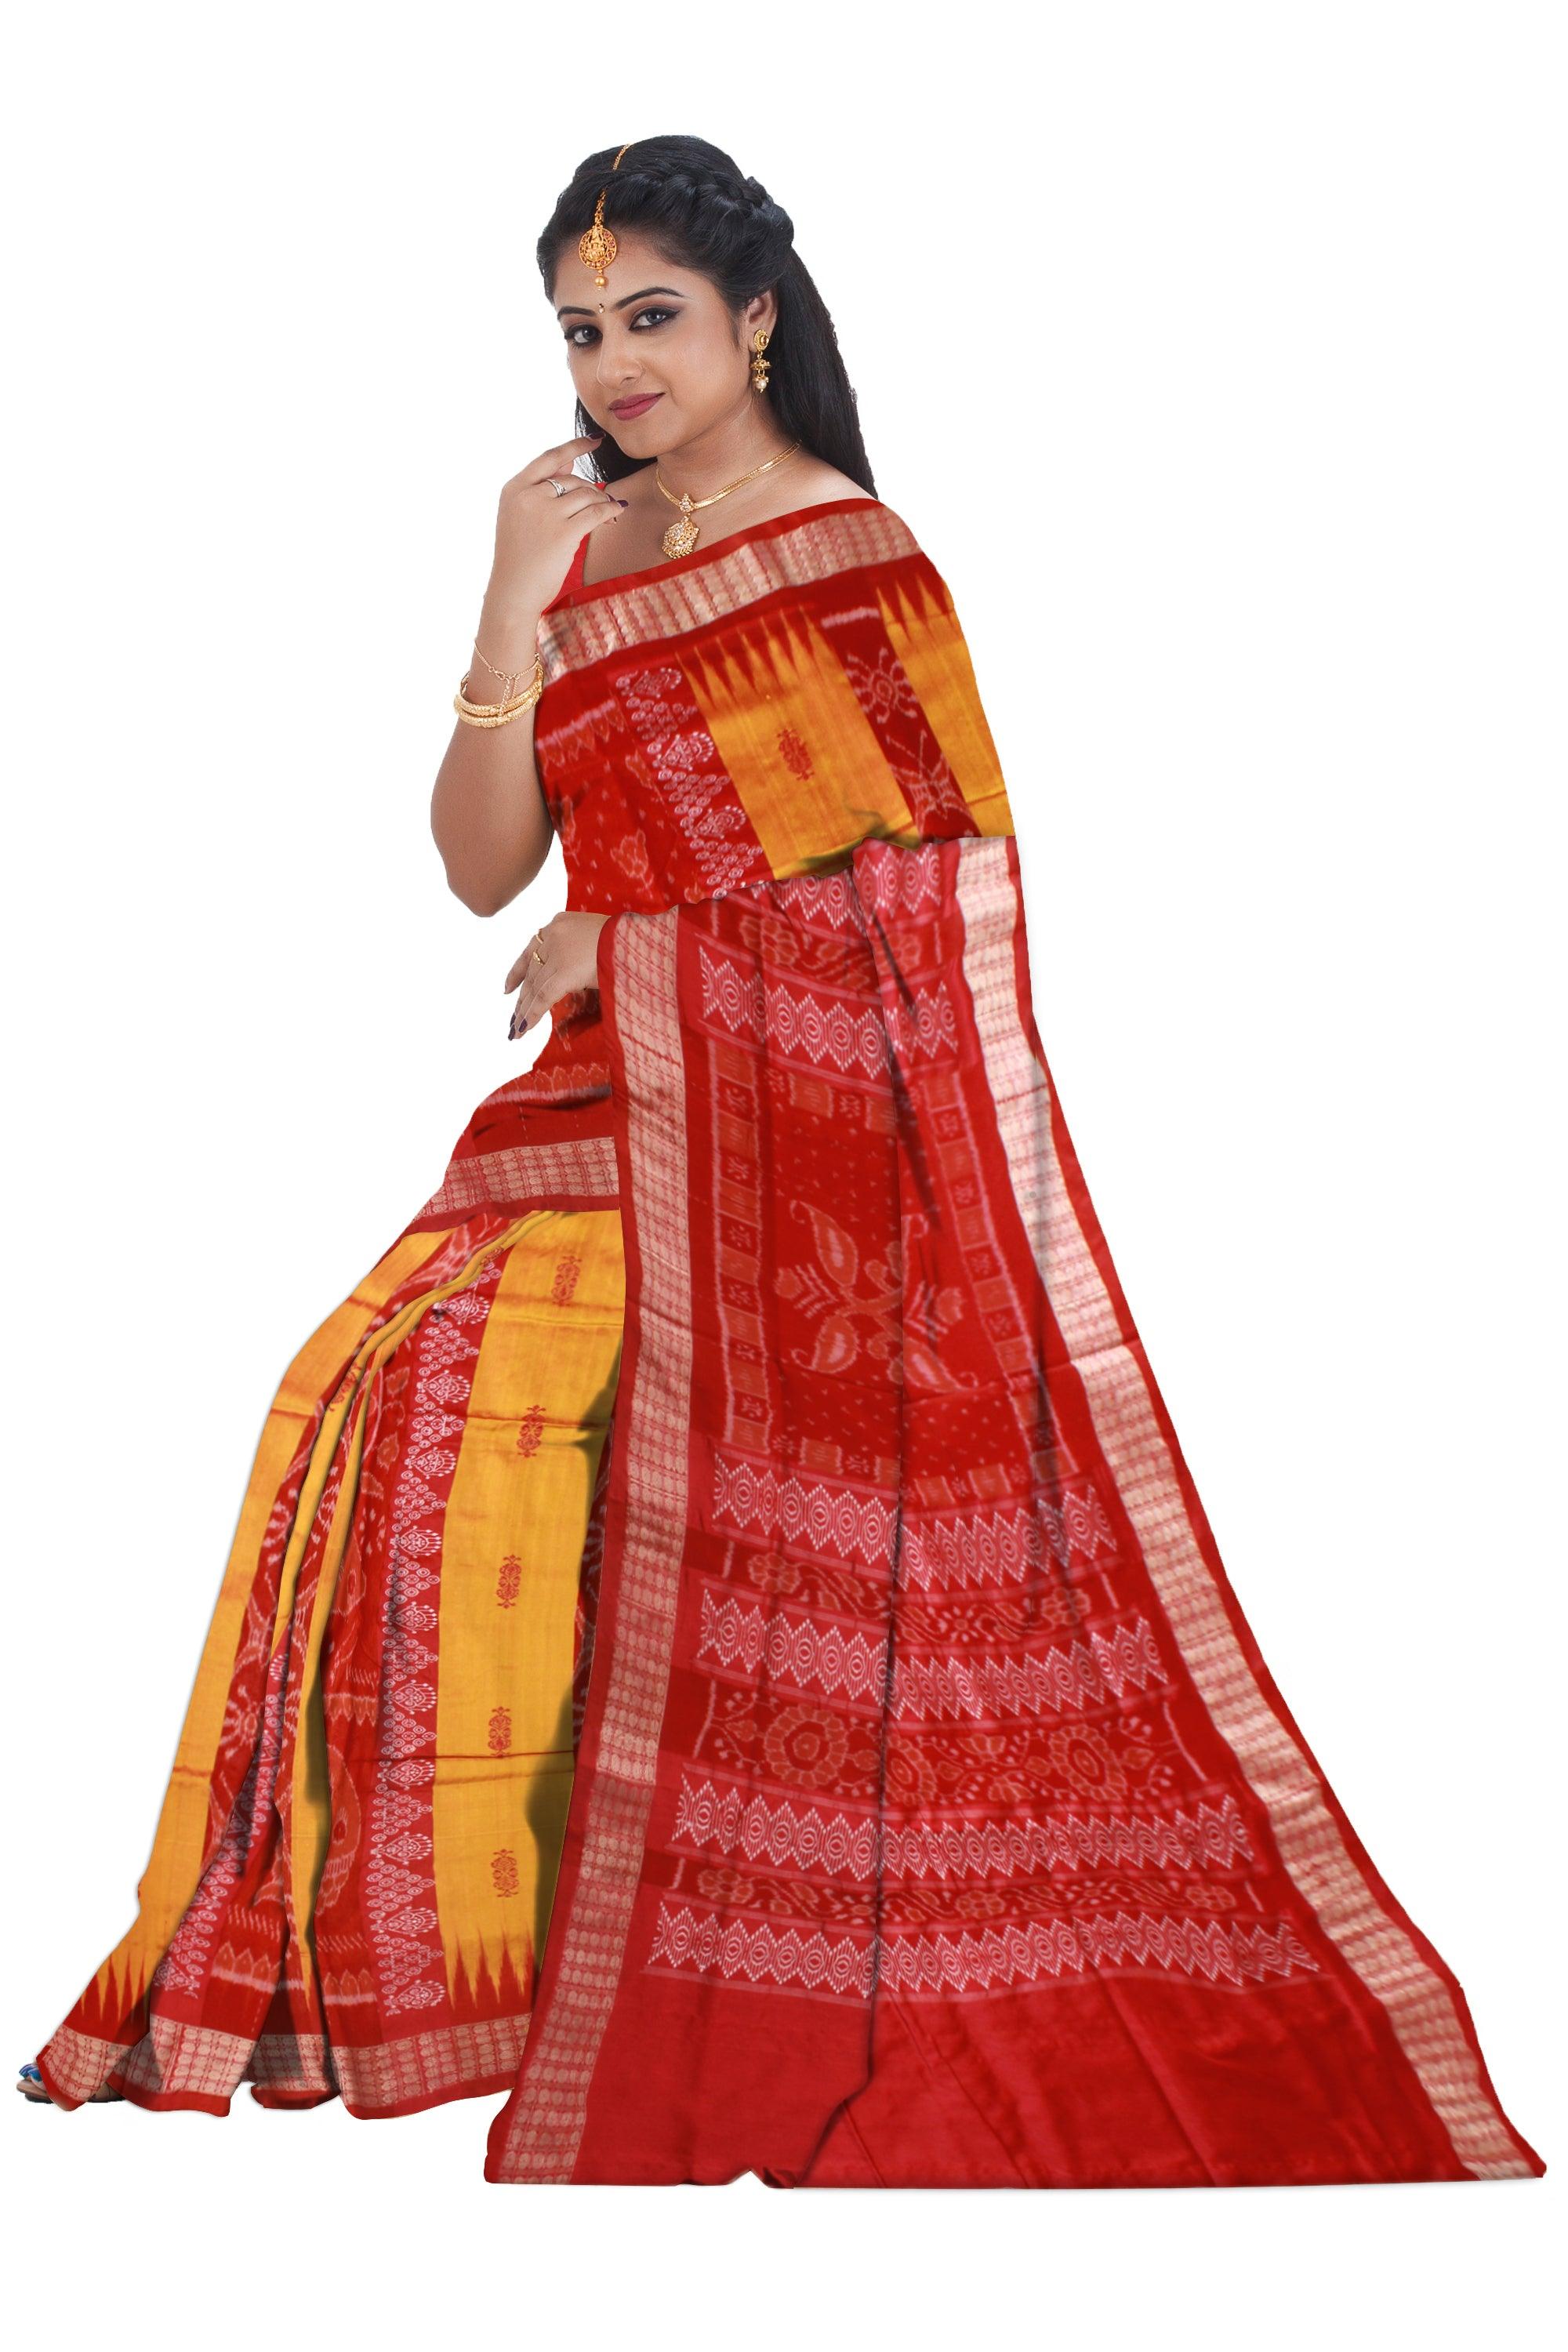 PEACOCK PATTERN BOMKEI PATA SAREE IN YELLOW AND RED COLOR BASE, WITH BLOUSE PIECE. - Koshali Arts & Crafts Enterprise